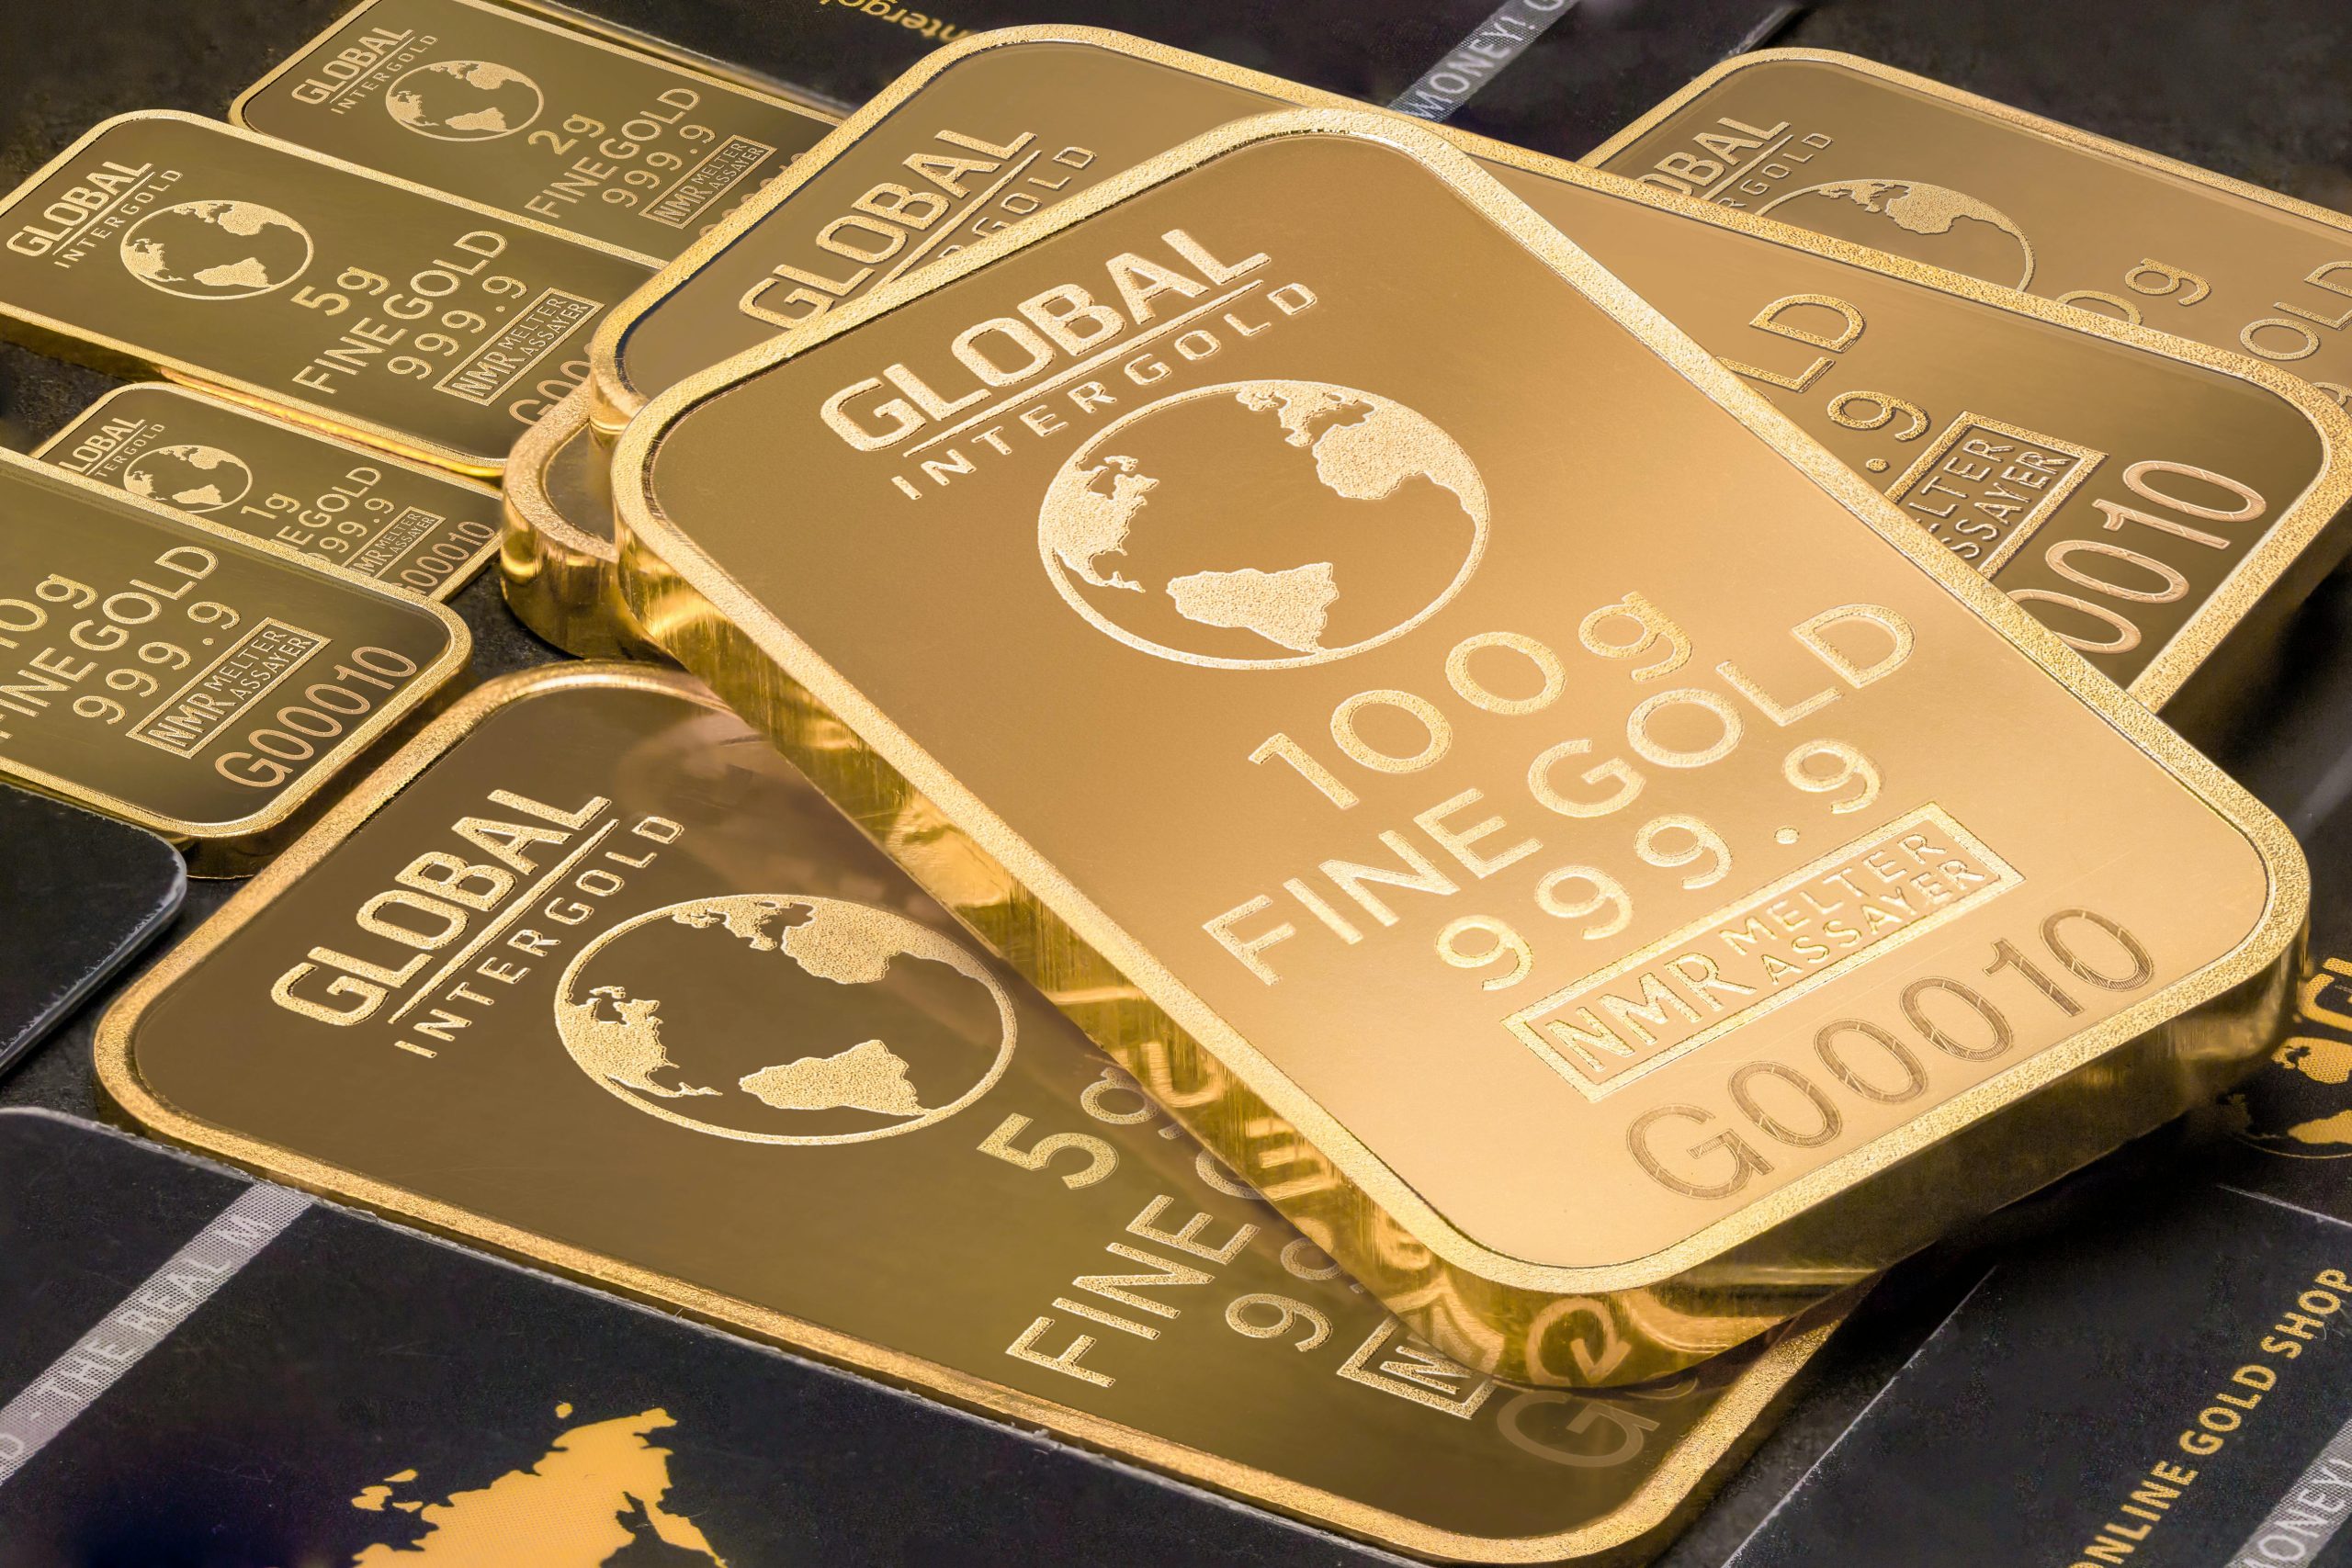 Picture of gold bars. Photo courtesy of Michael Steinberg via Pexels.com